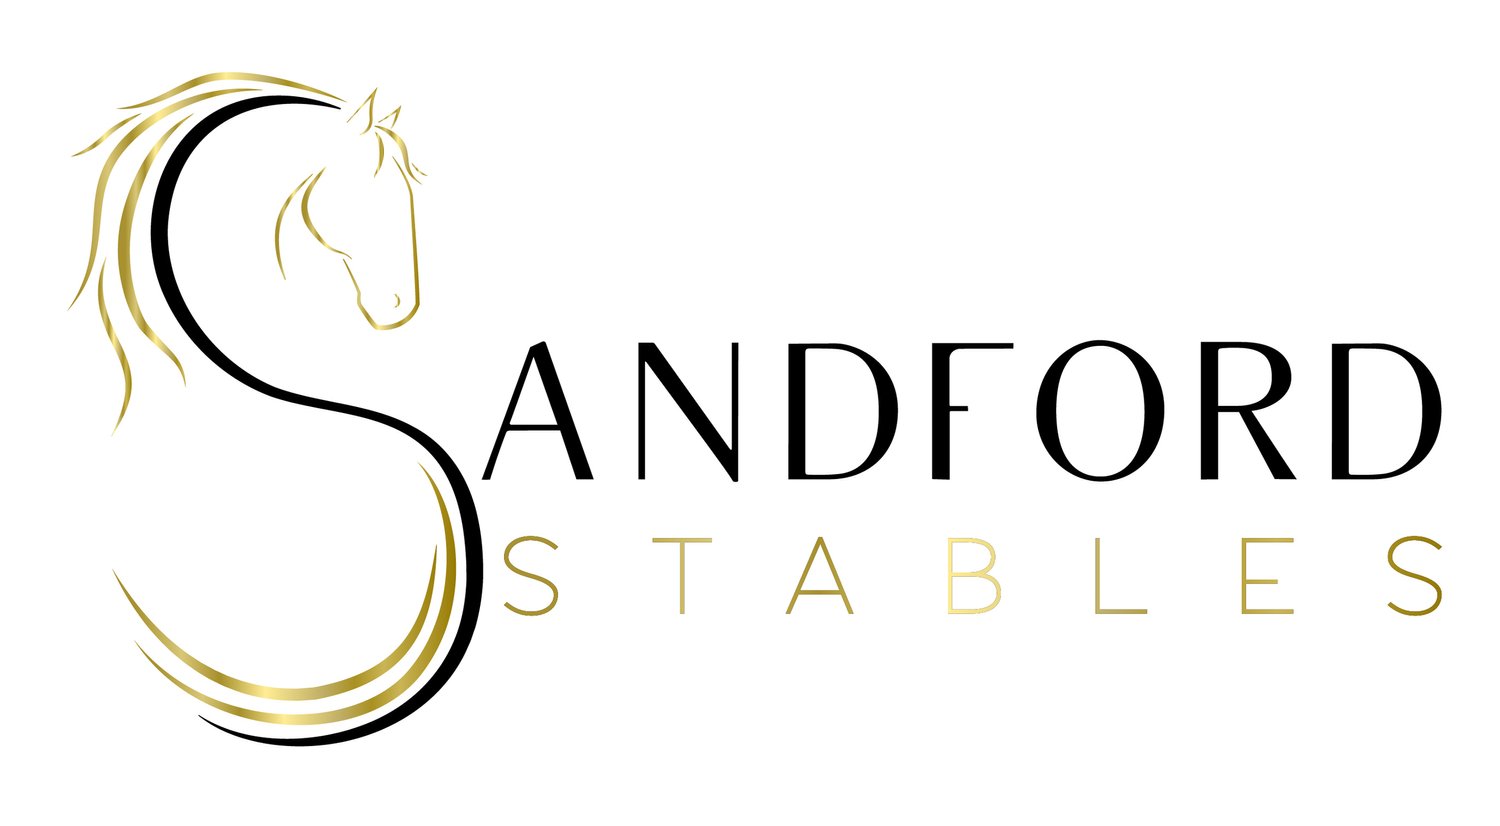 Sandford Stables (Prev. Woodhouse Farm Stables)